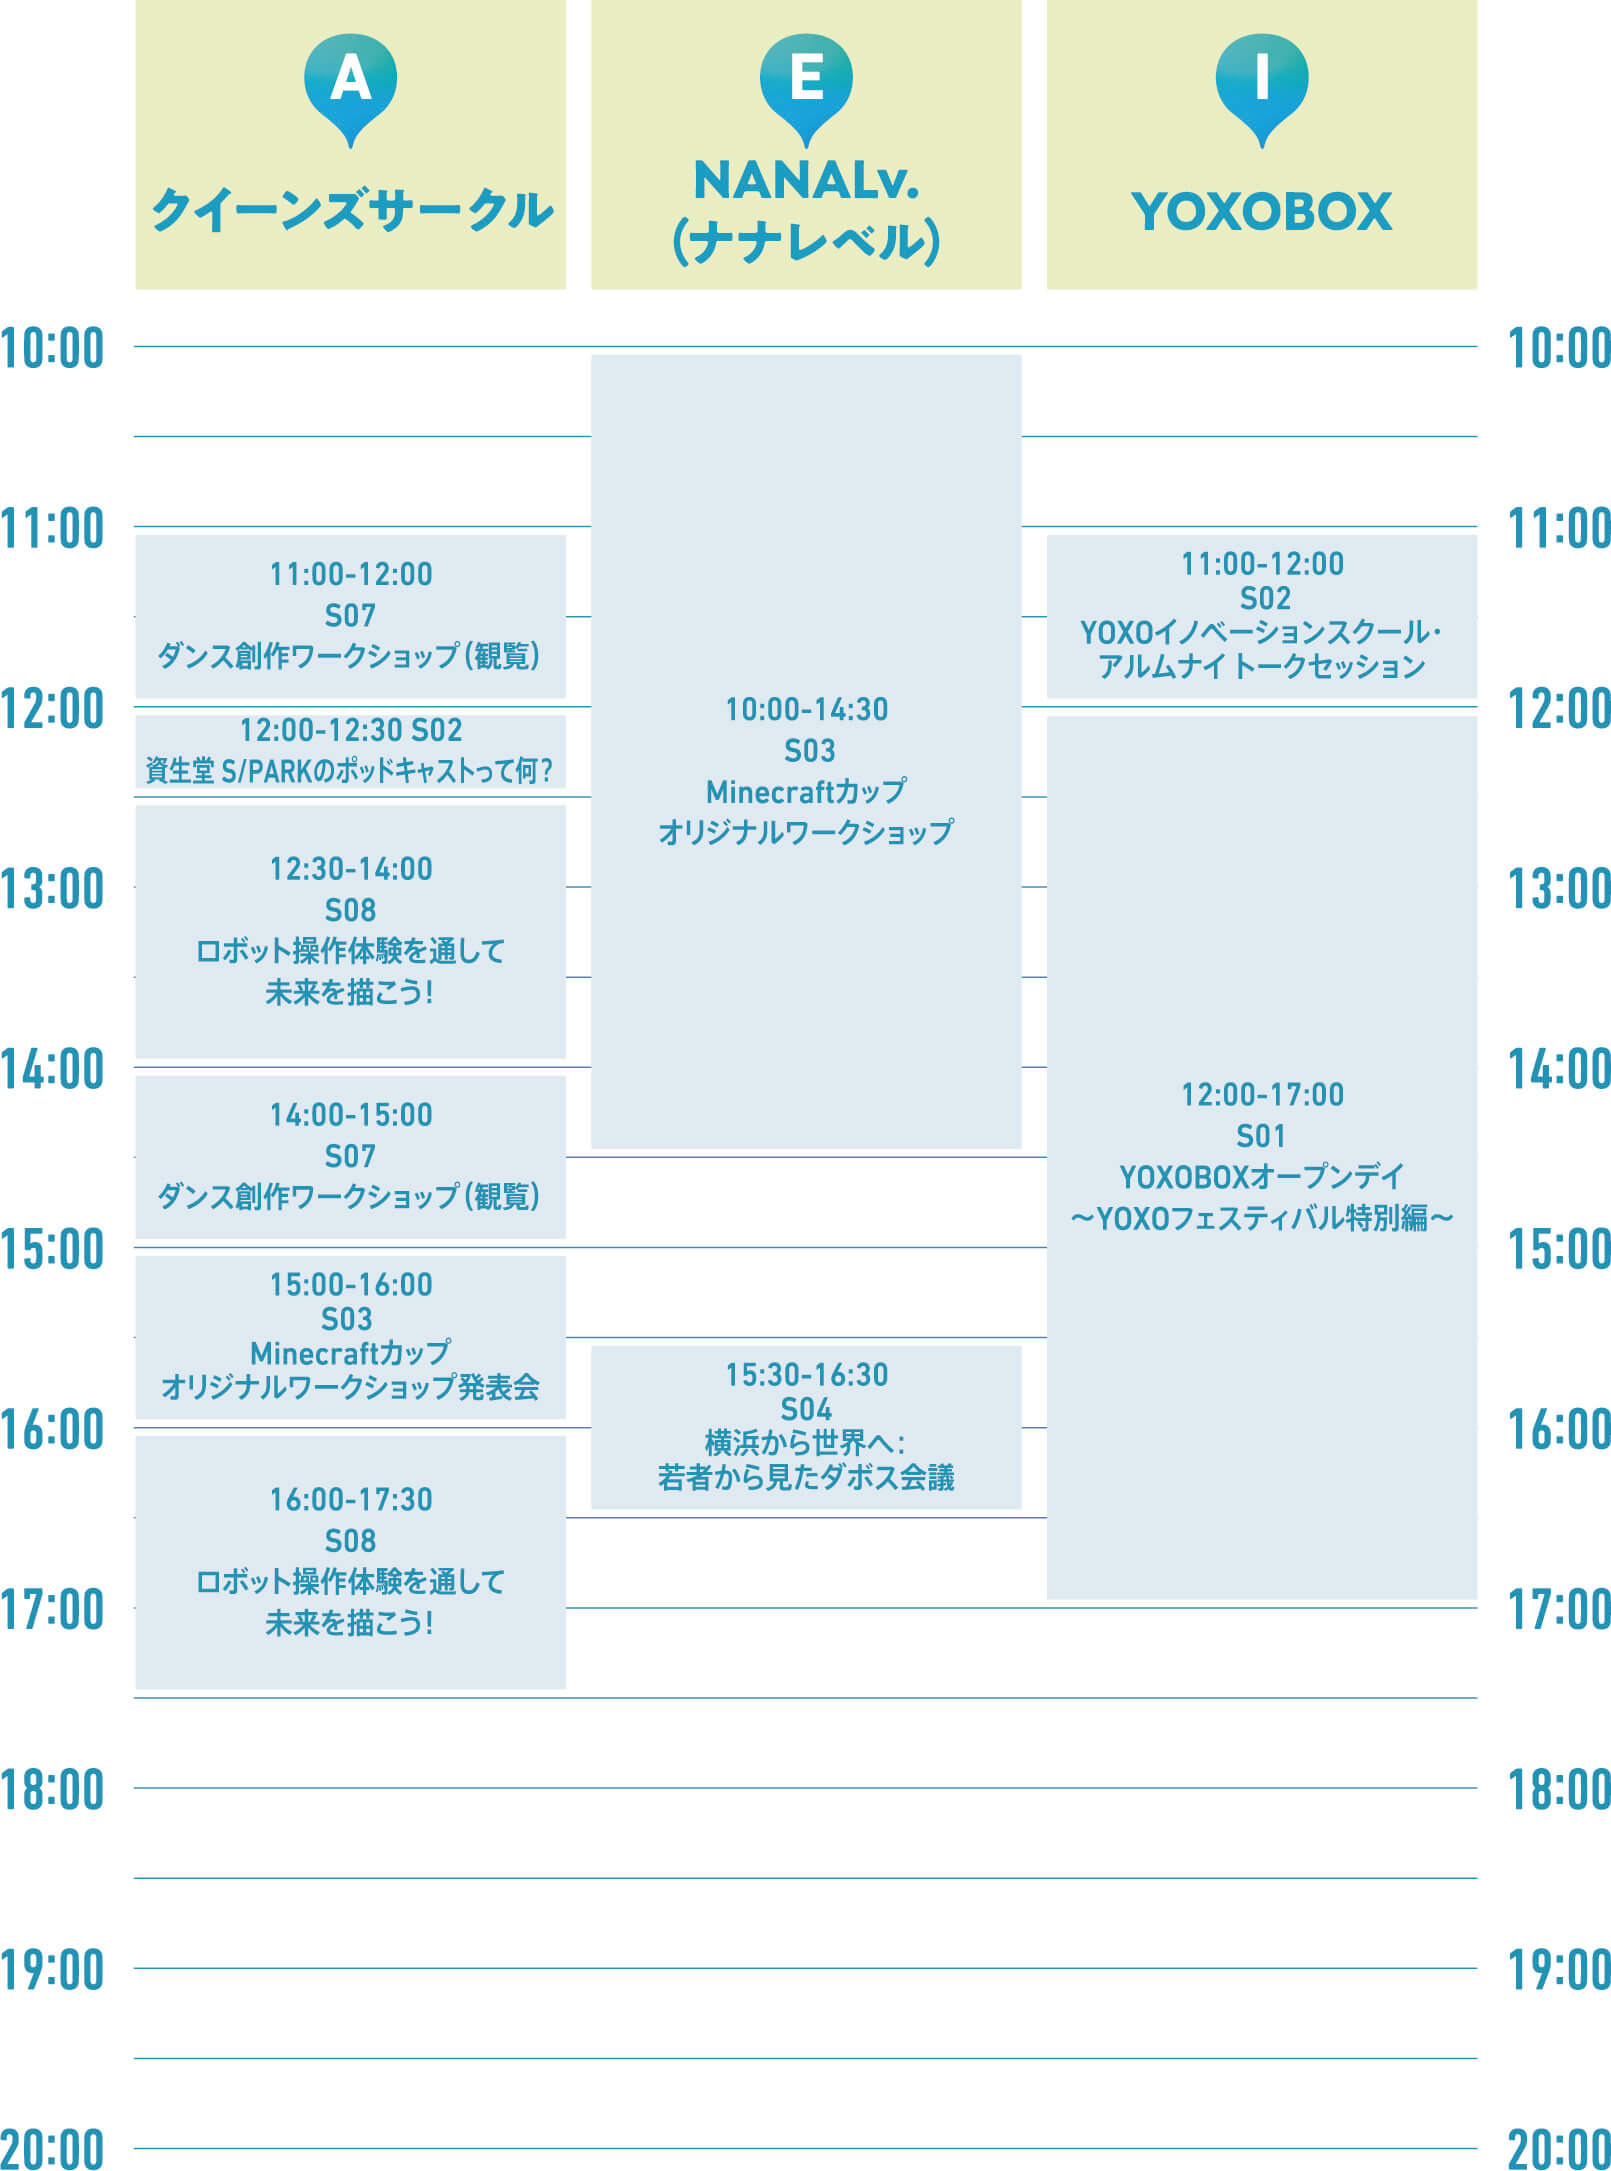 Time schedule 3